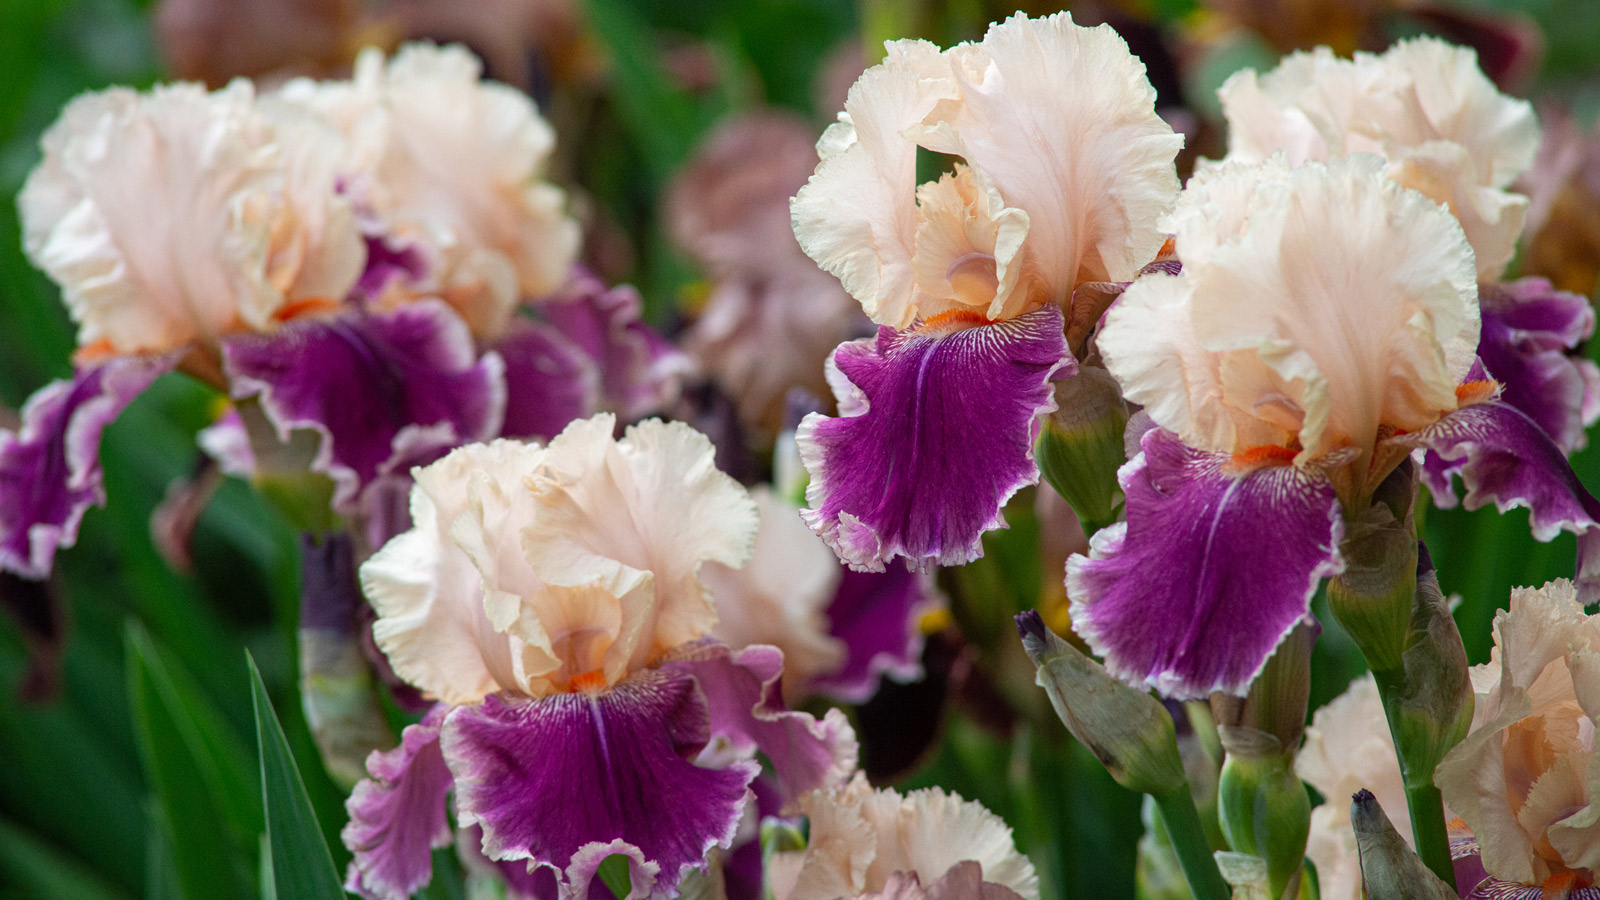 bearded-iris-varieties-make-a-statement-with-these